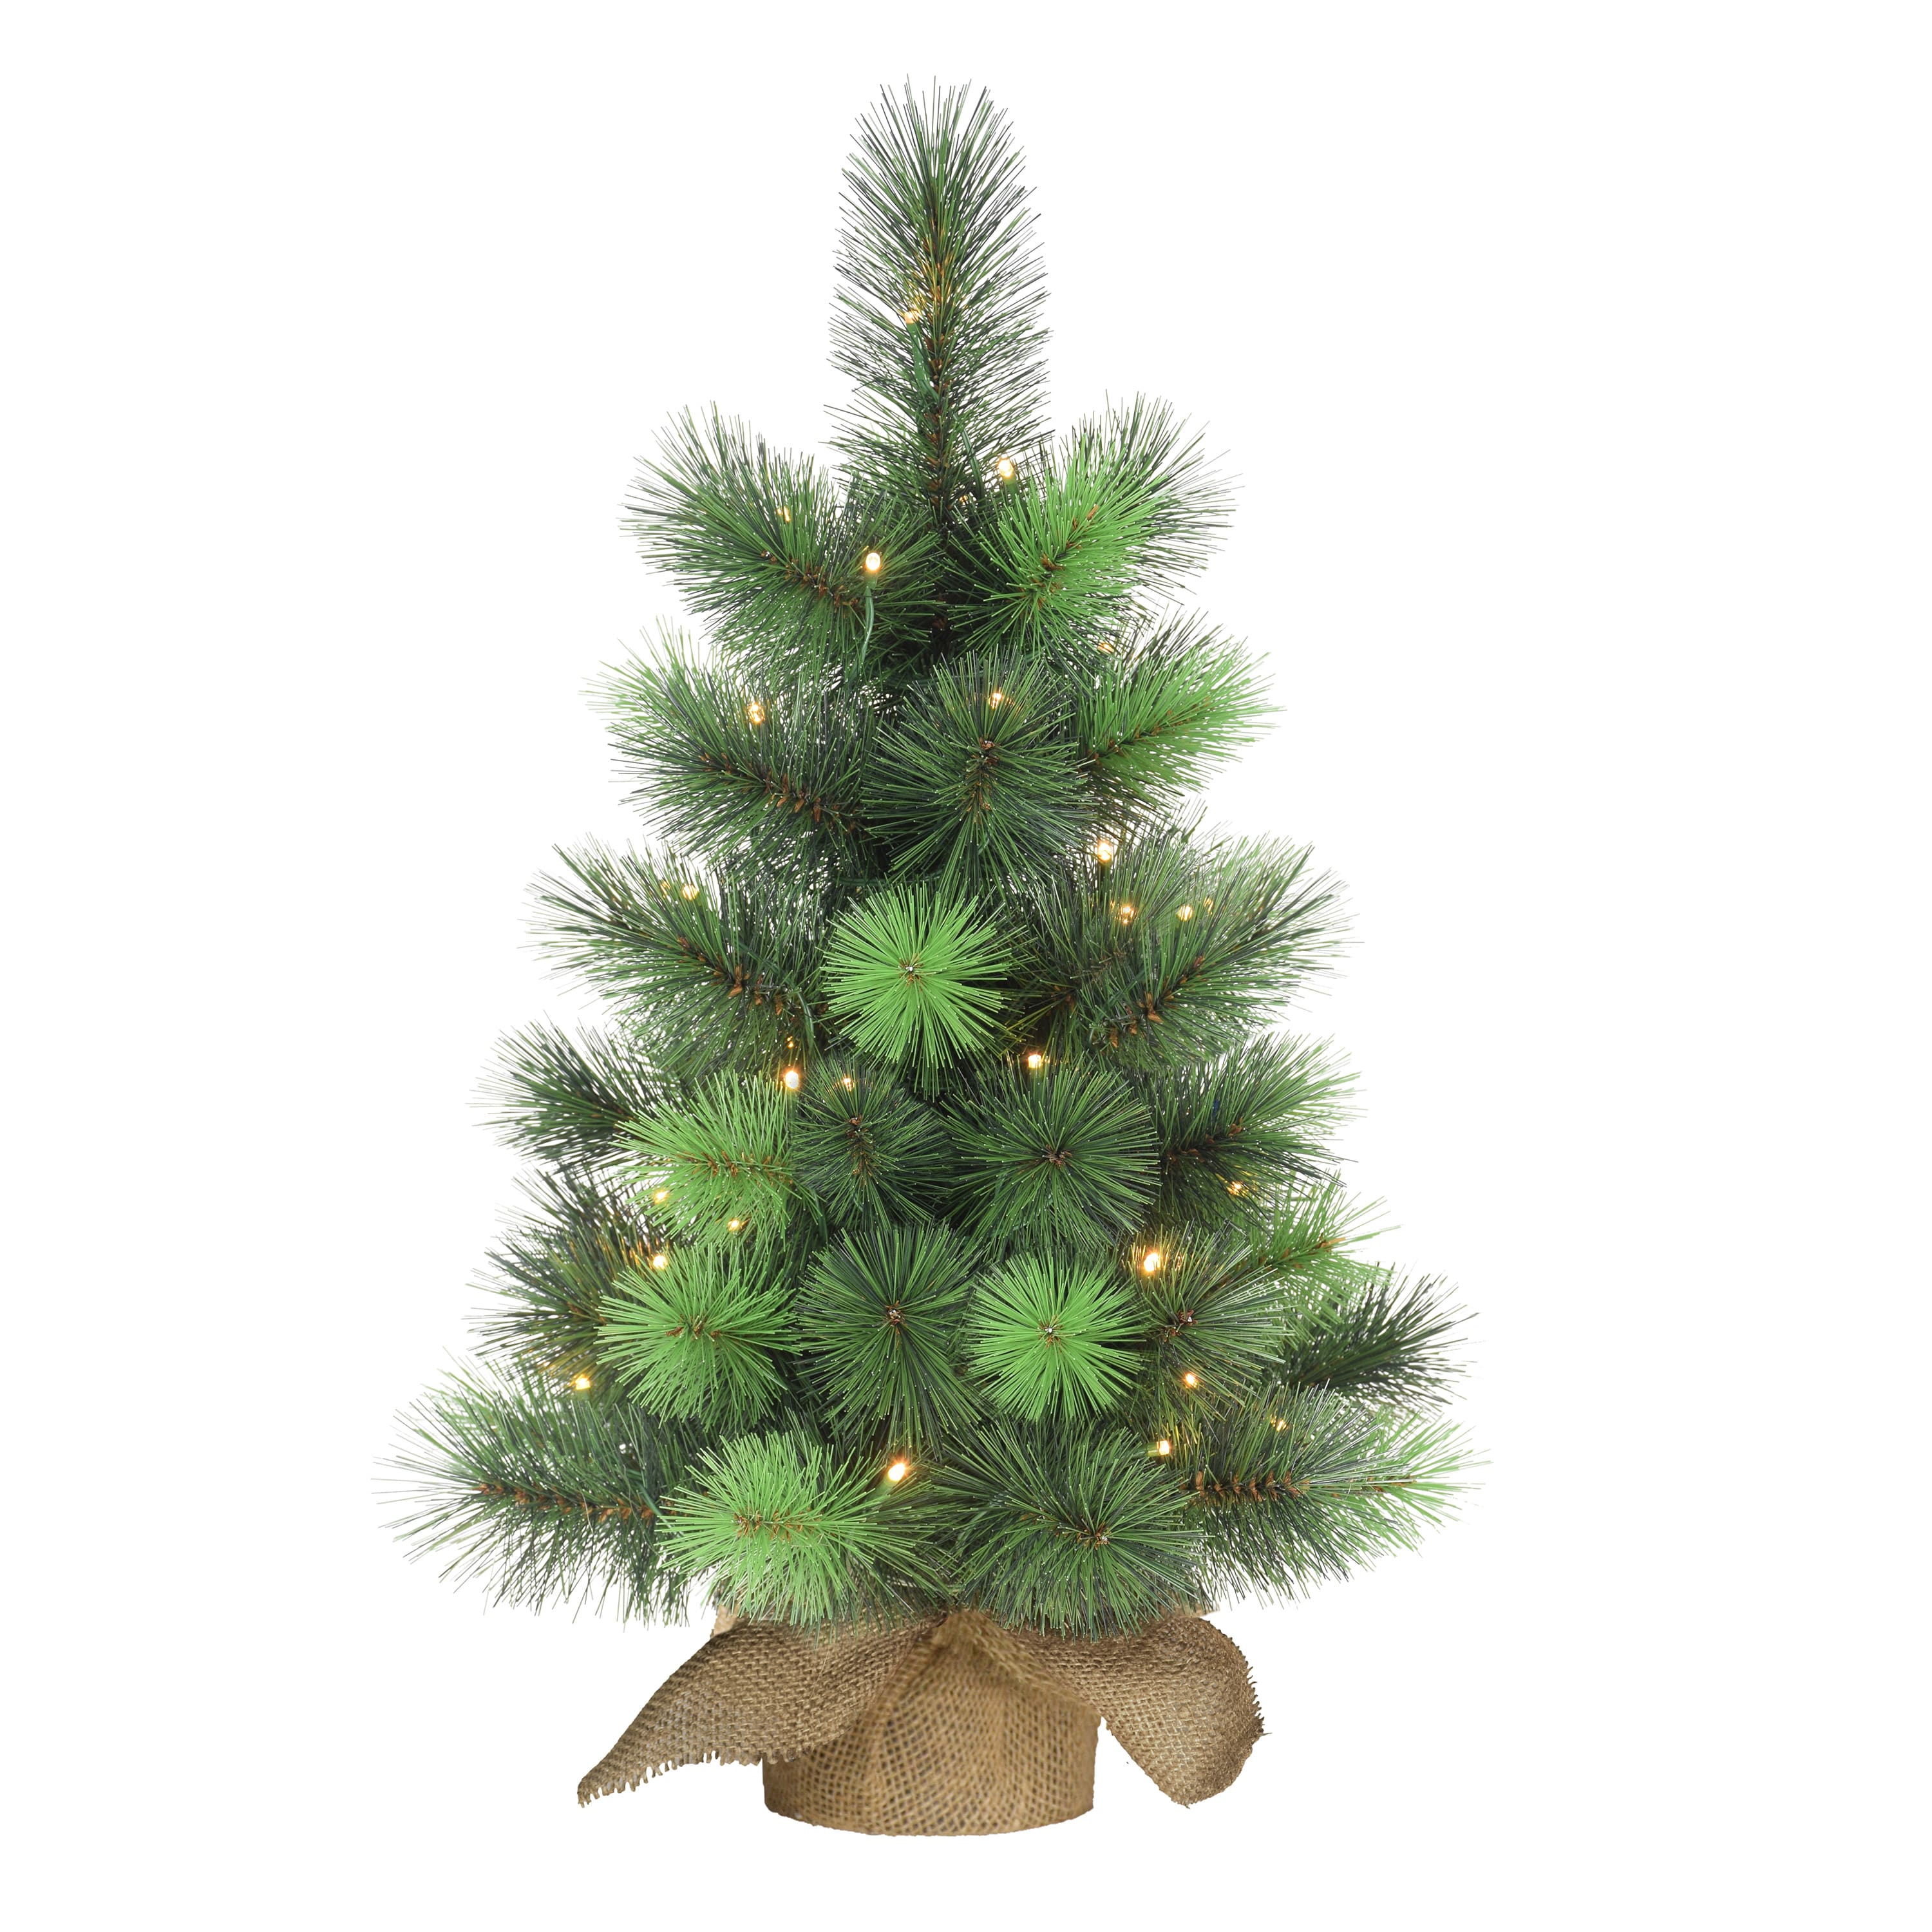 6 Pack: 2ft. Pre-Lit Artificial Christmas Tree in Burlap Base, Warm White LED Lights